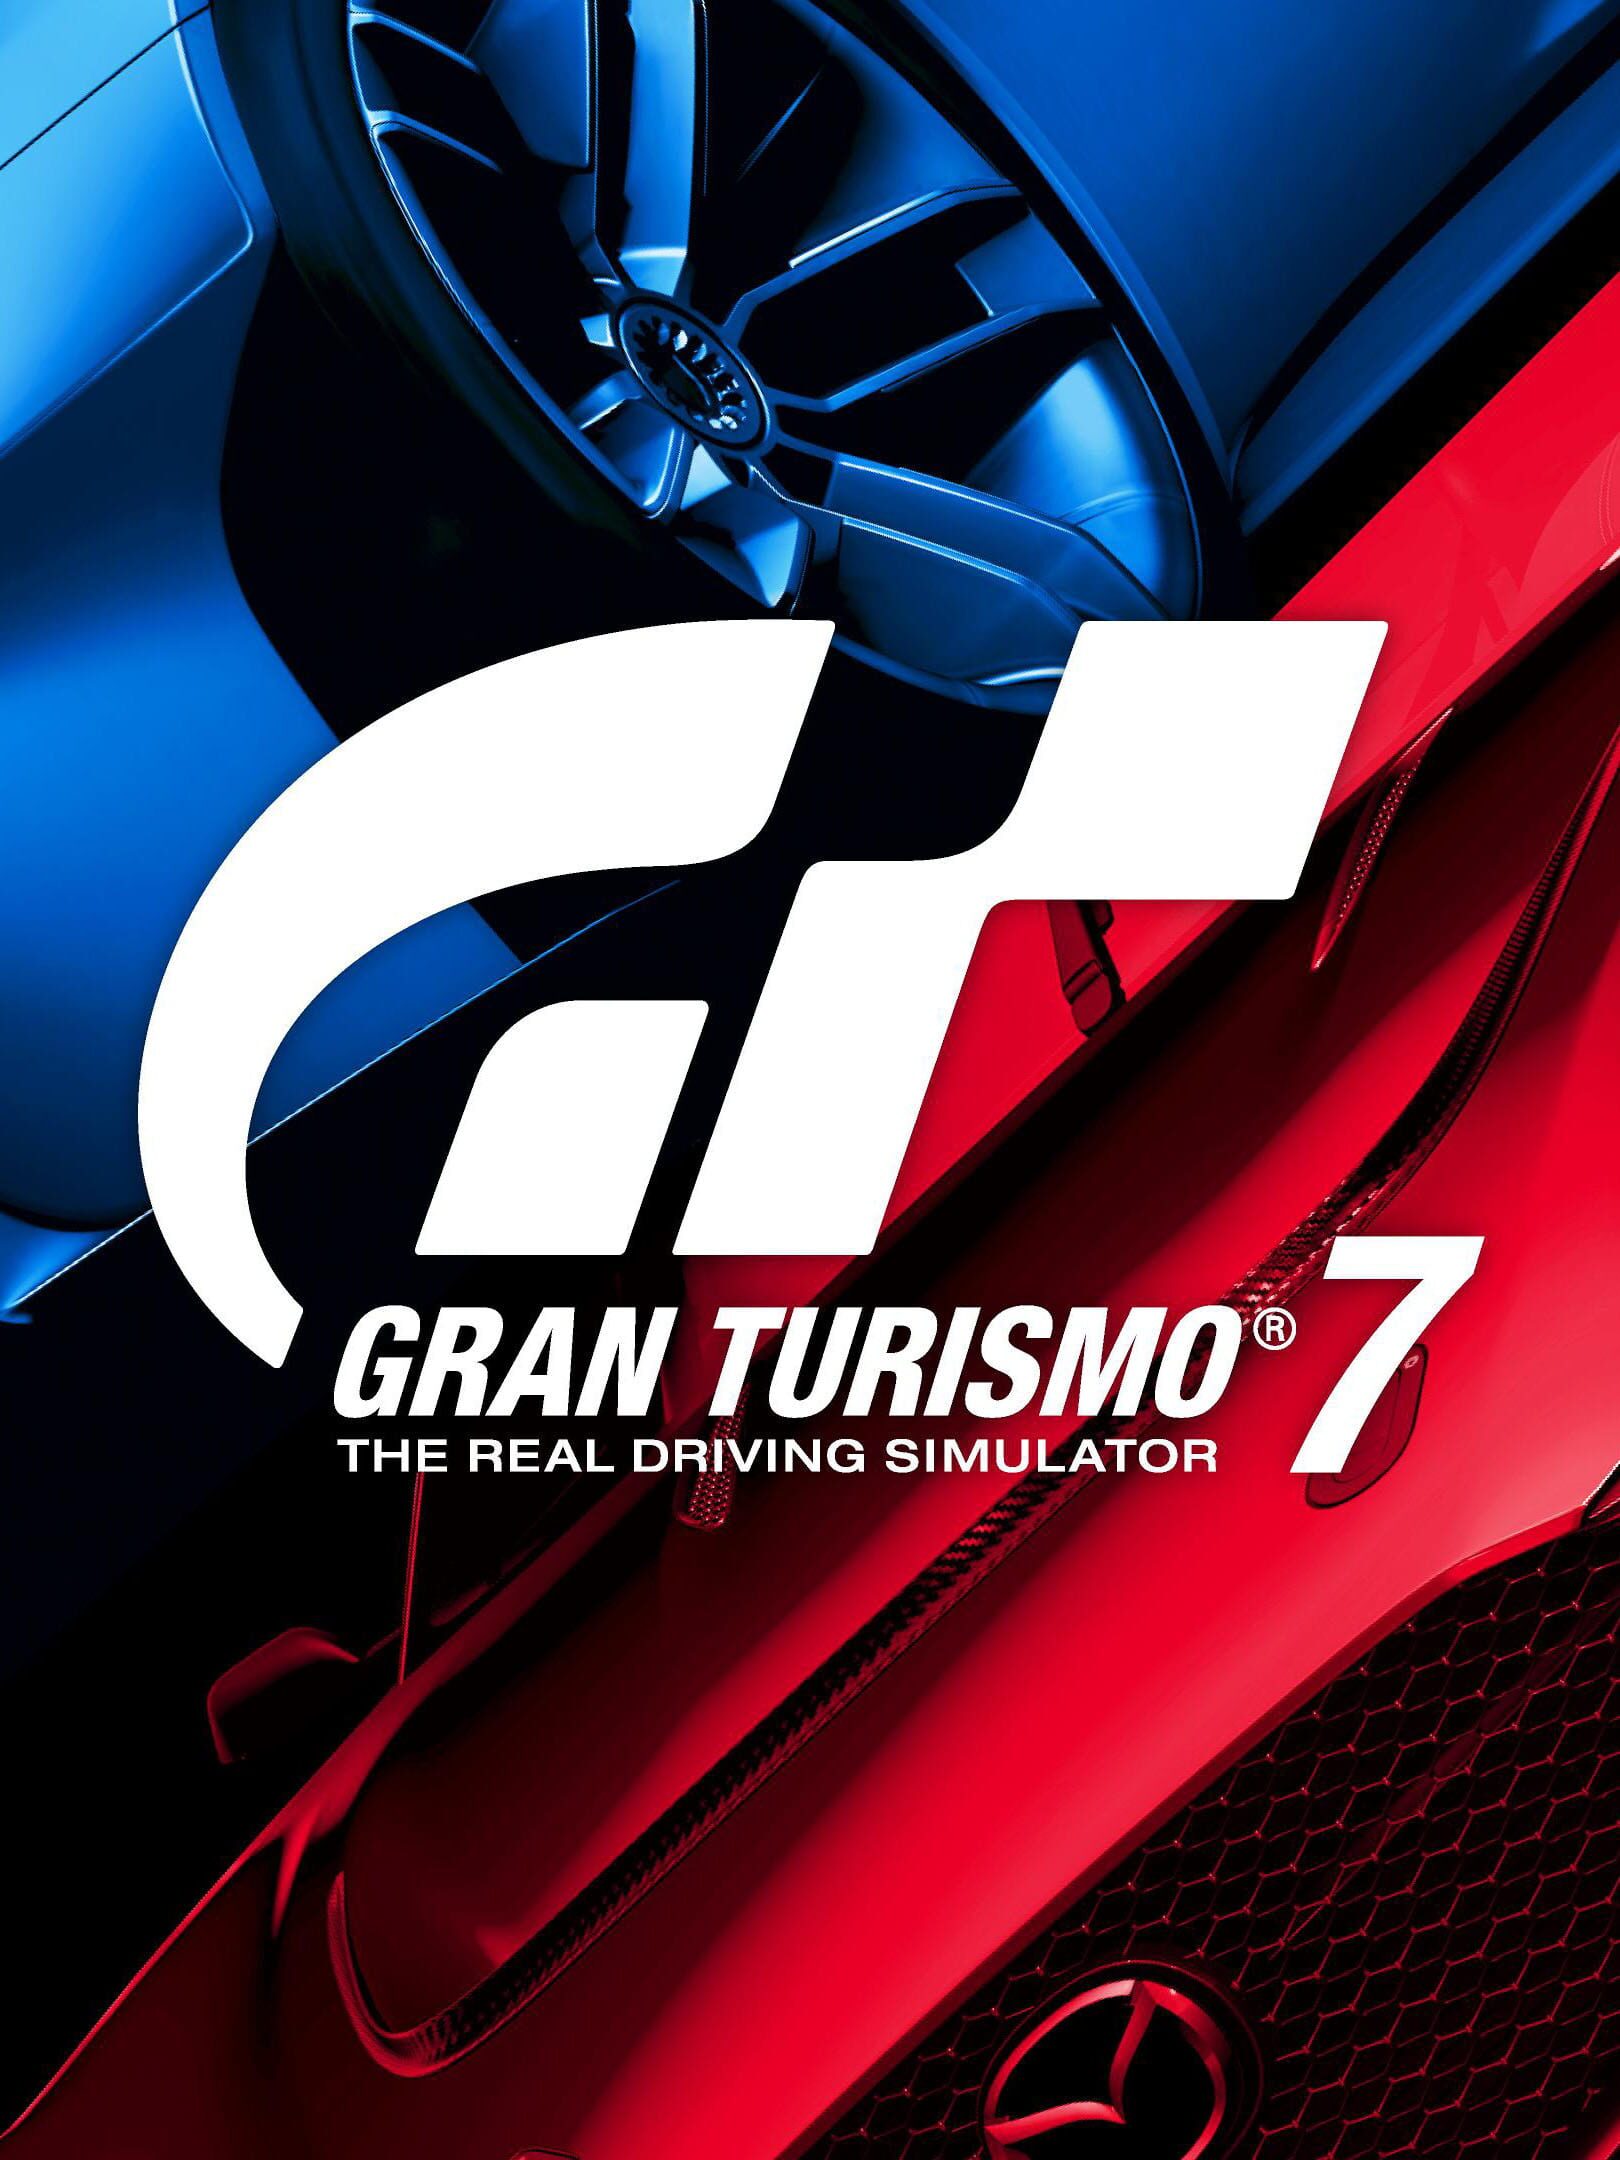 Is There a Gran Turismo 7 PC Release Date? - GameRevolution